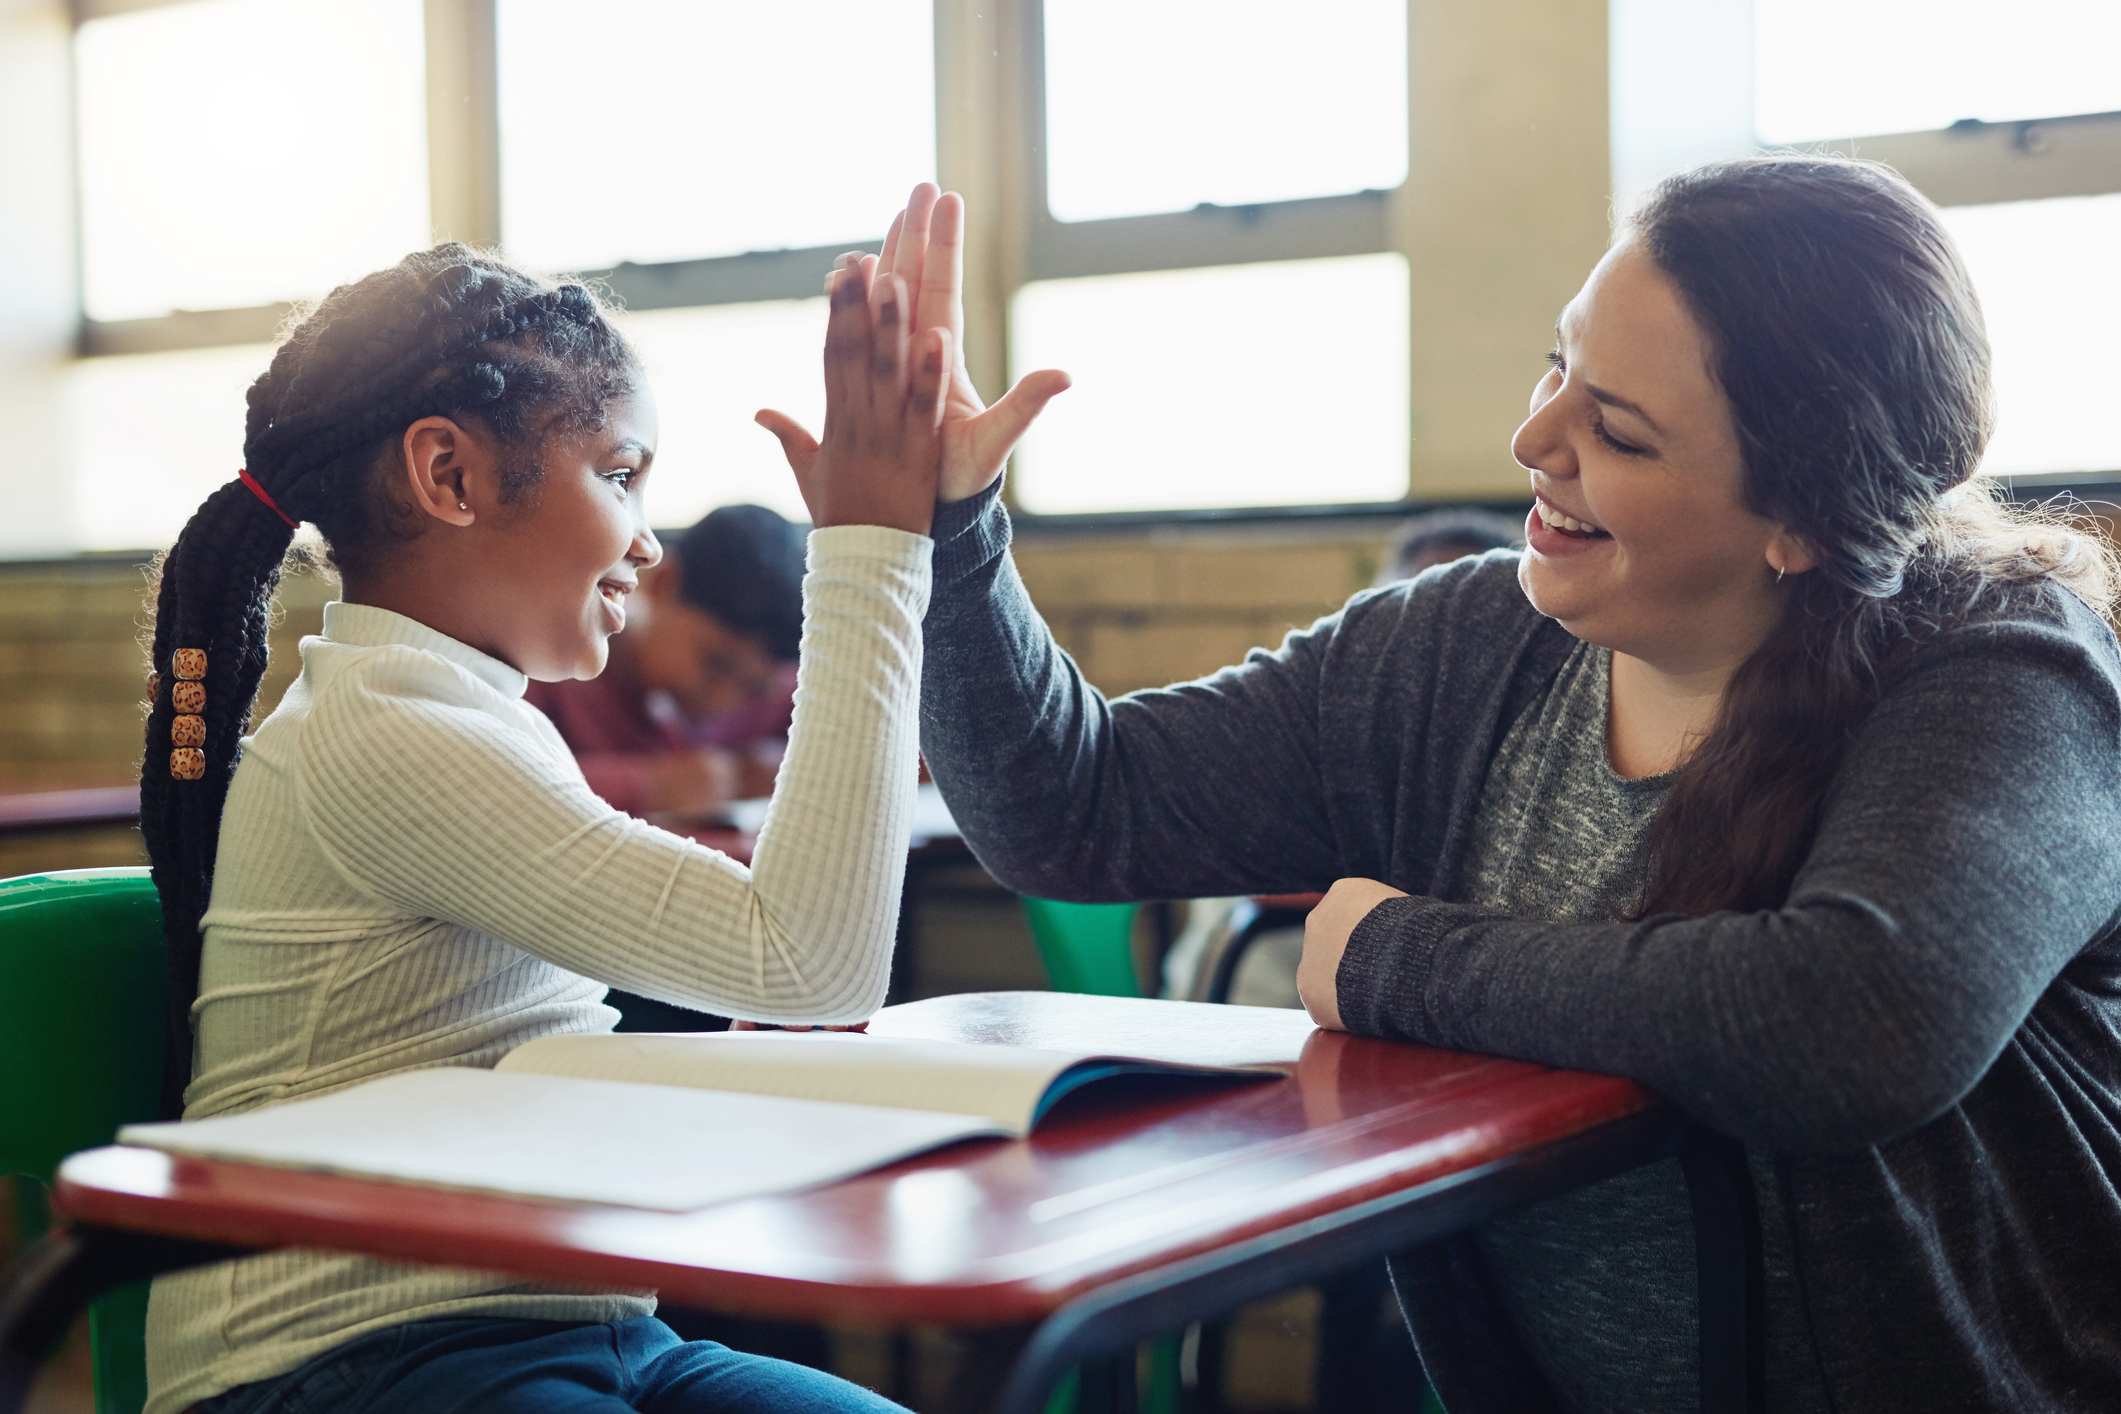 Middle school aged girl and teacher sit together at a desk in a classroom, smiling and high fiving.